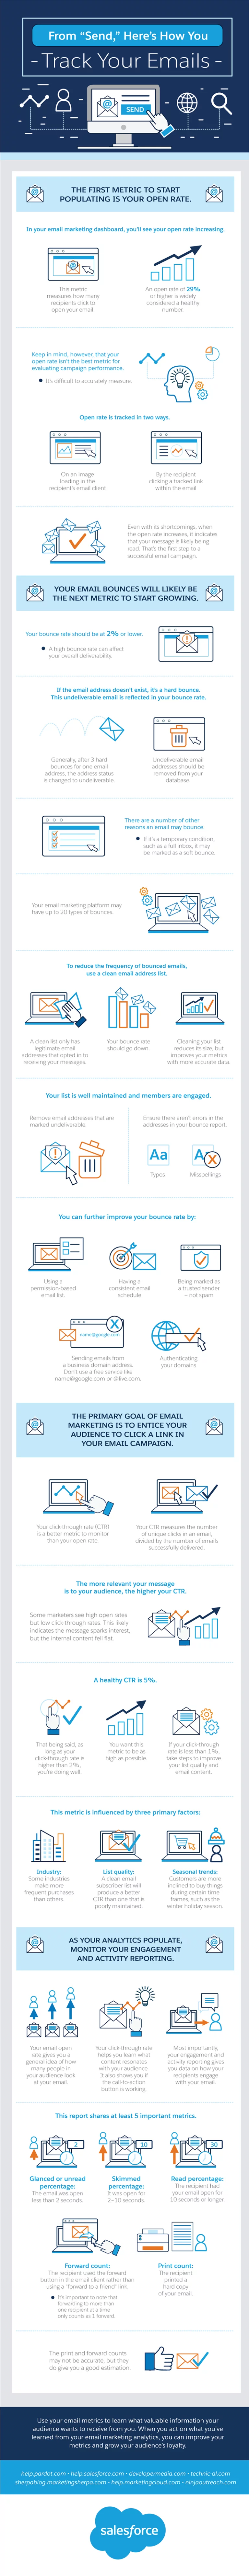 3 essential email marketing metrics you should track how to improve them infographic